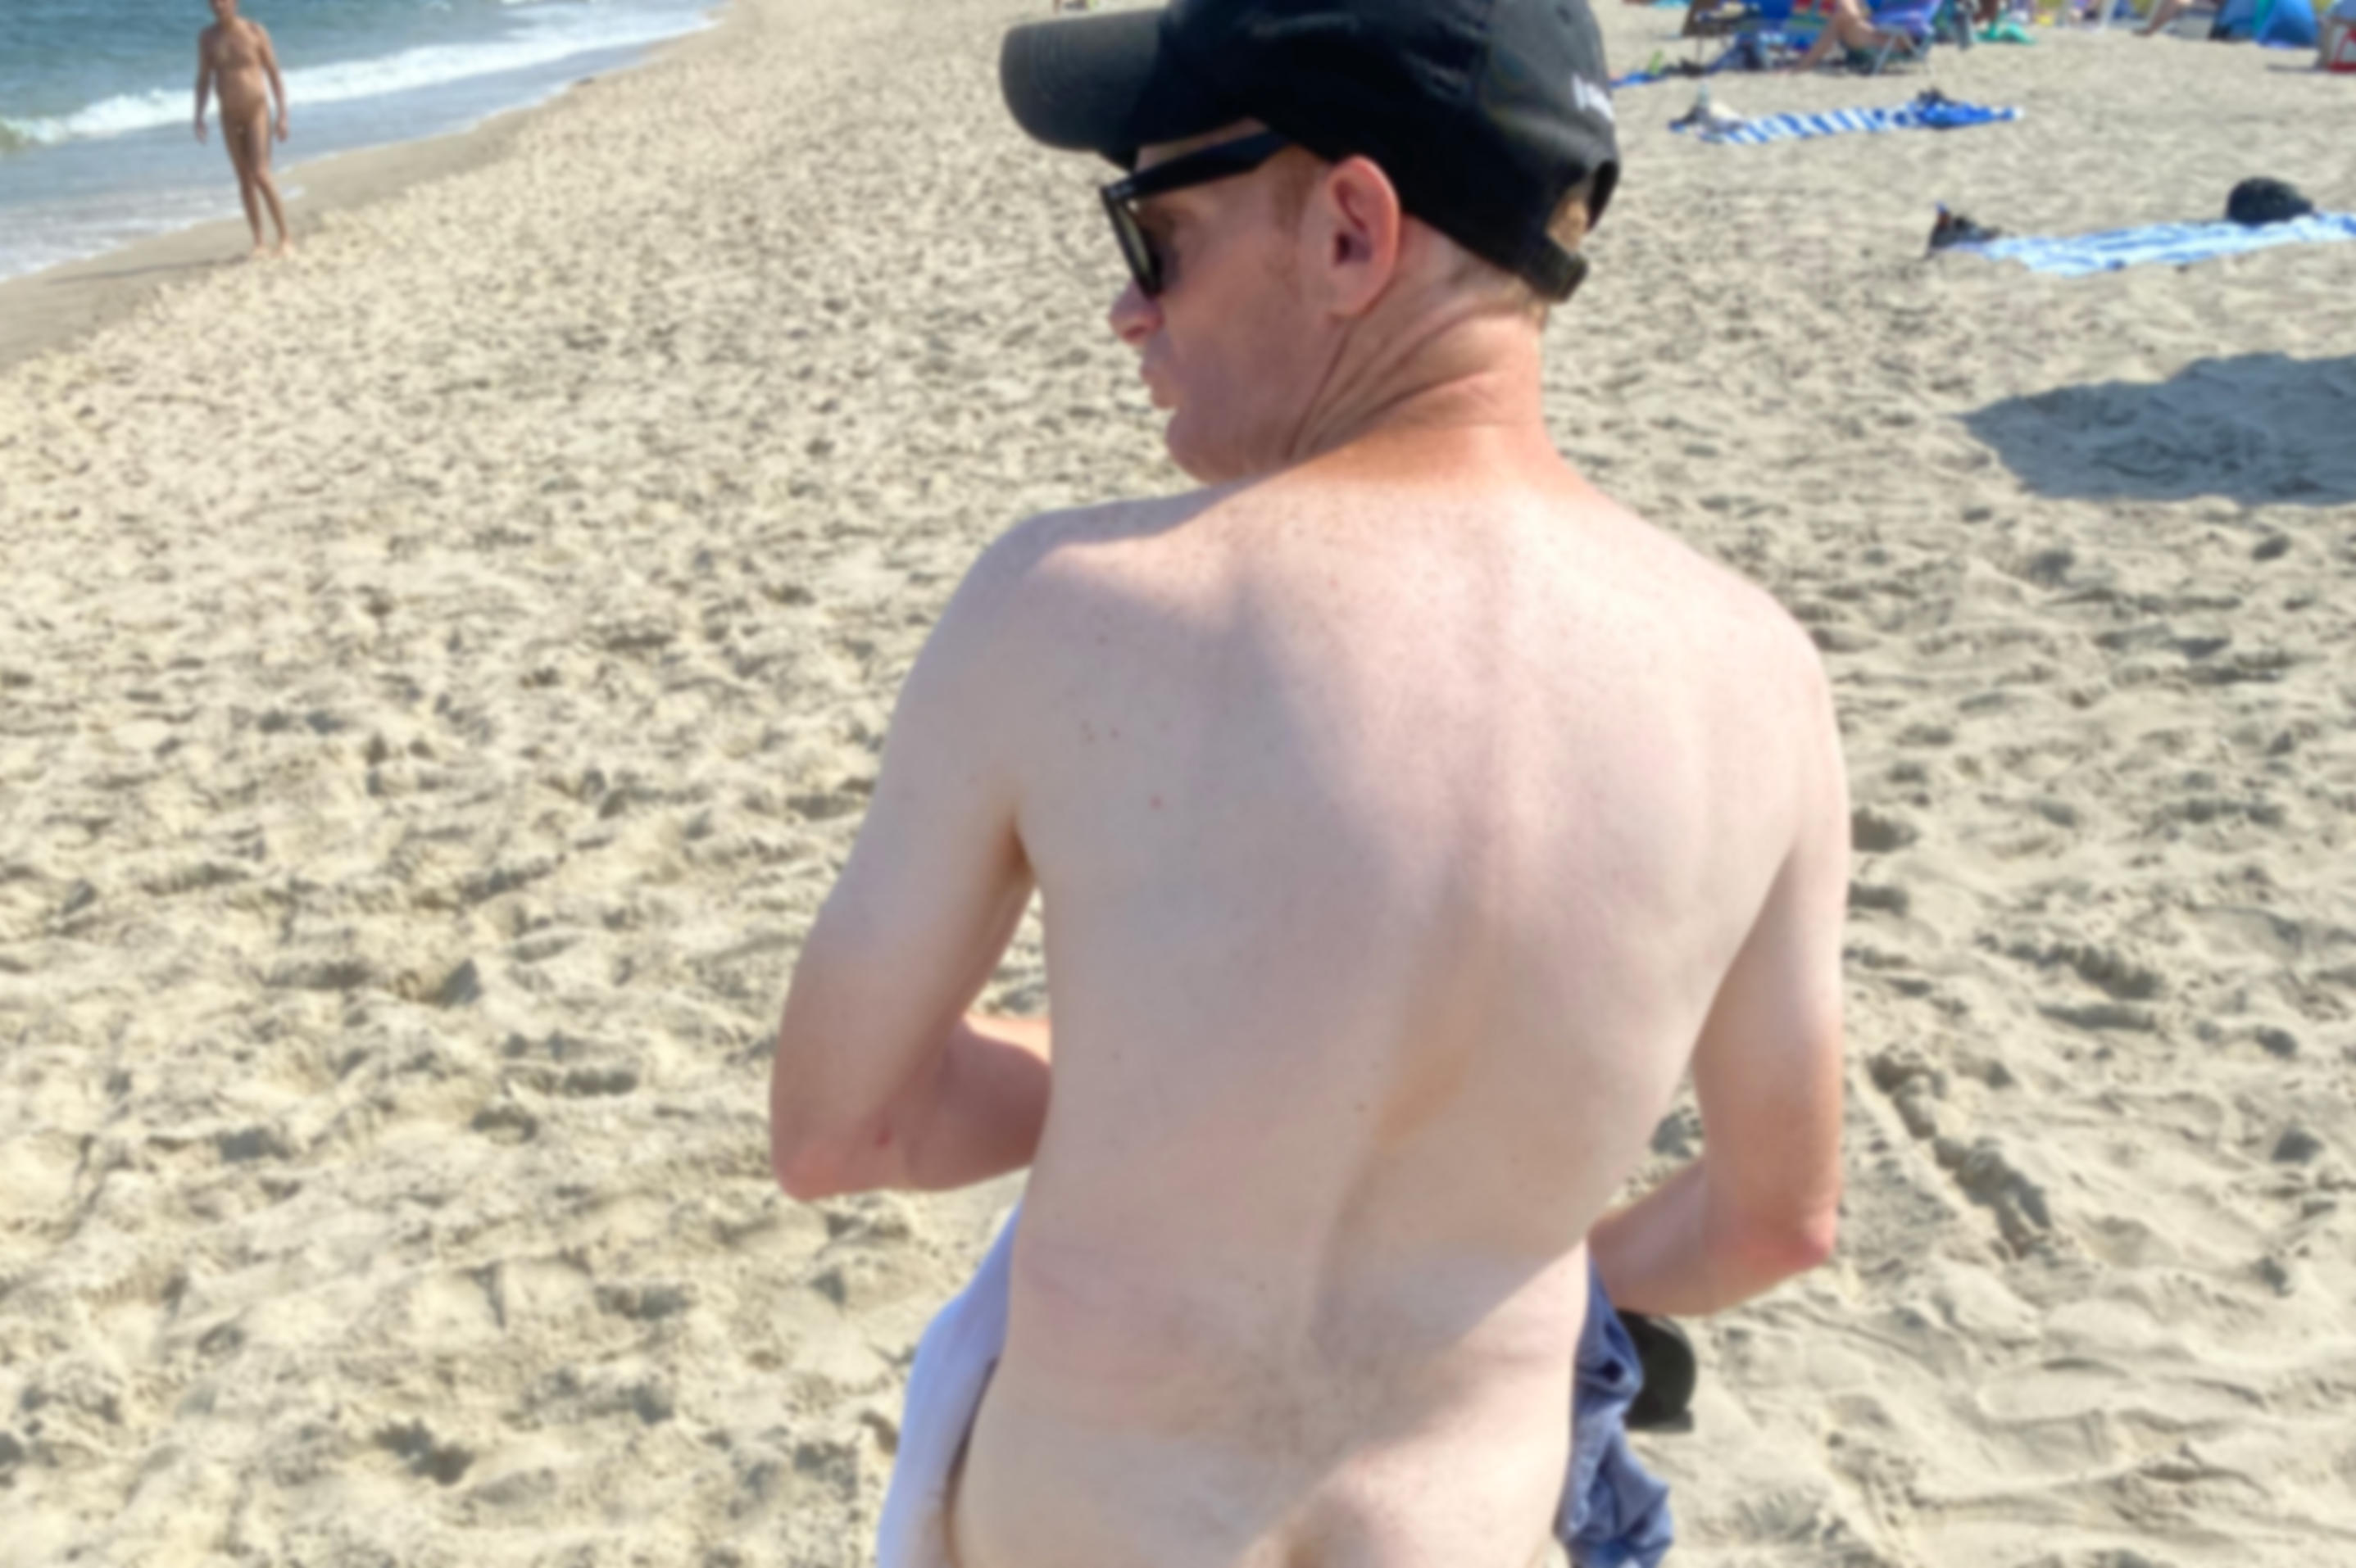 Medicated Pete Fulfills His Dream of Visiting a Nude Beach Howard Stern